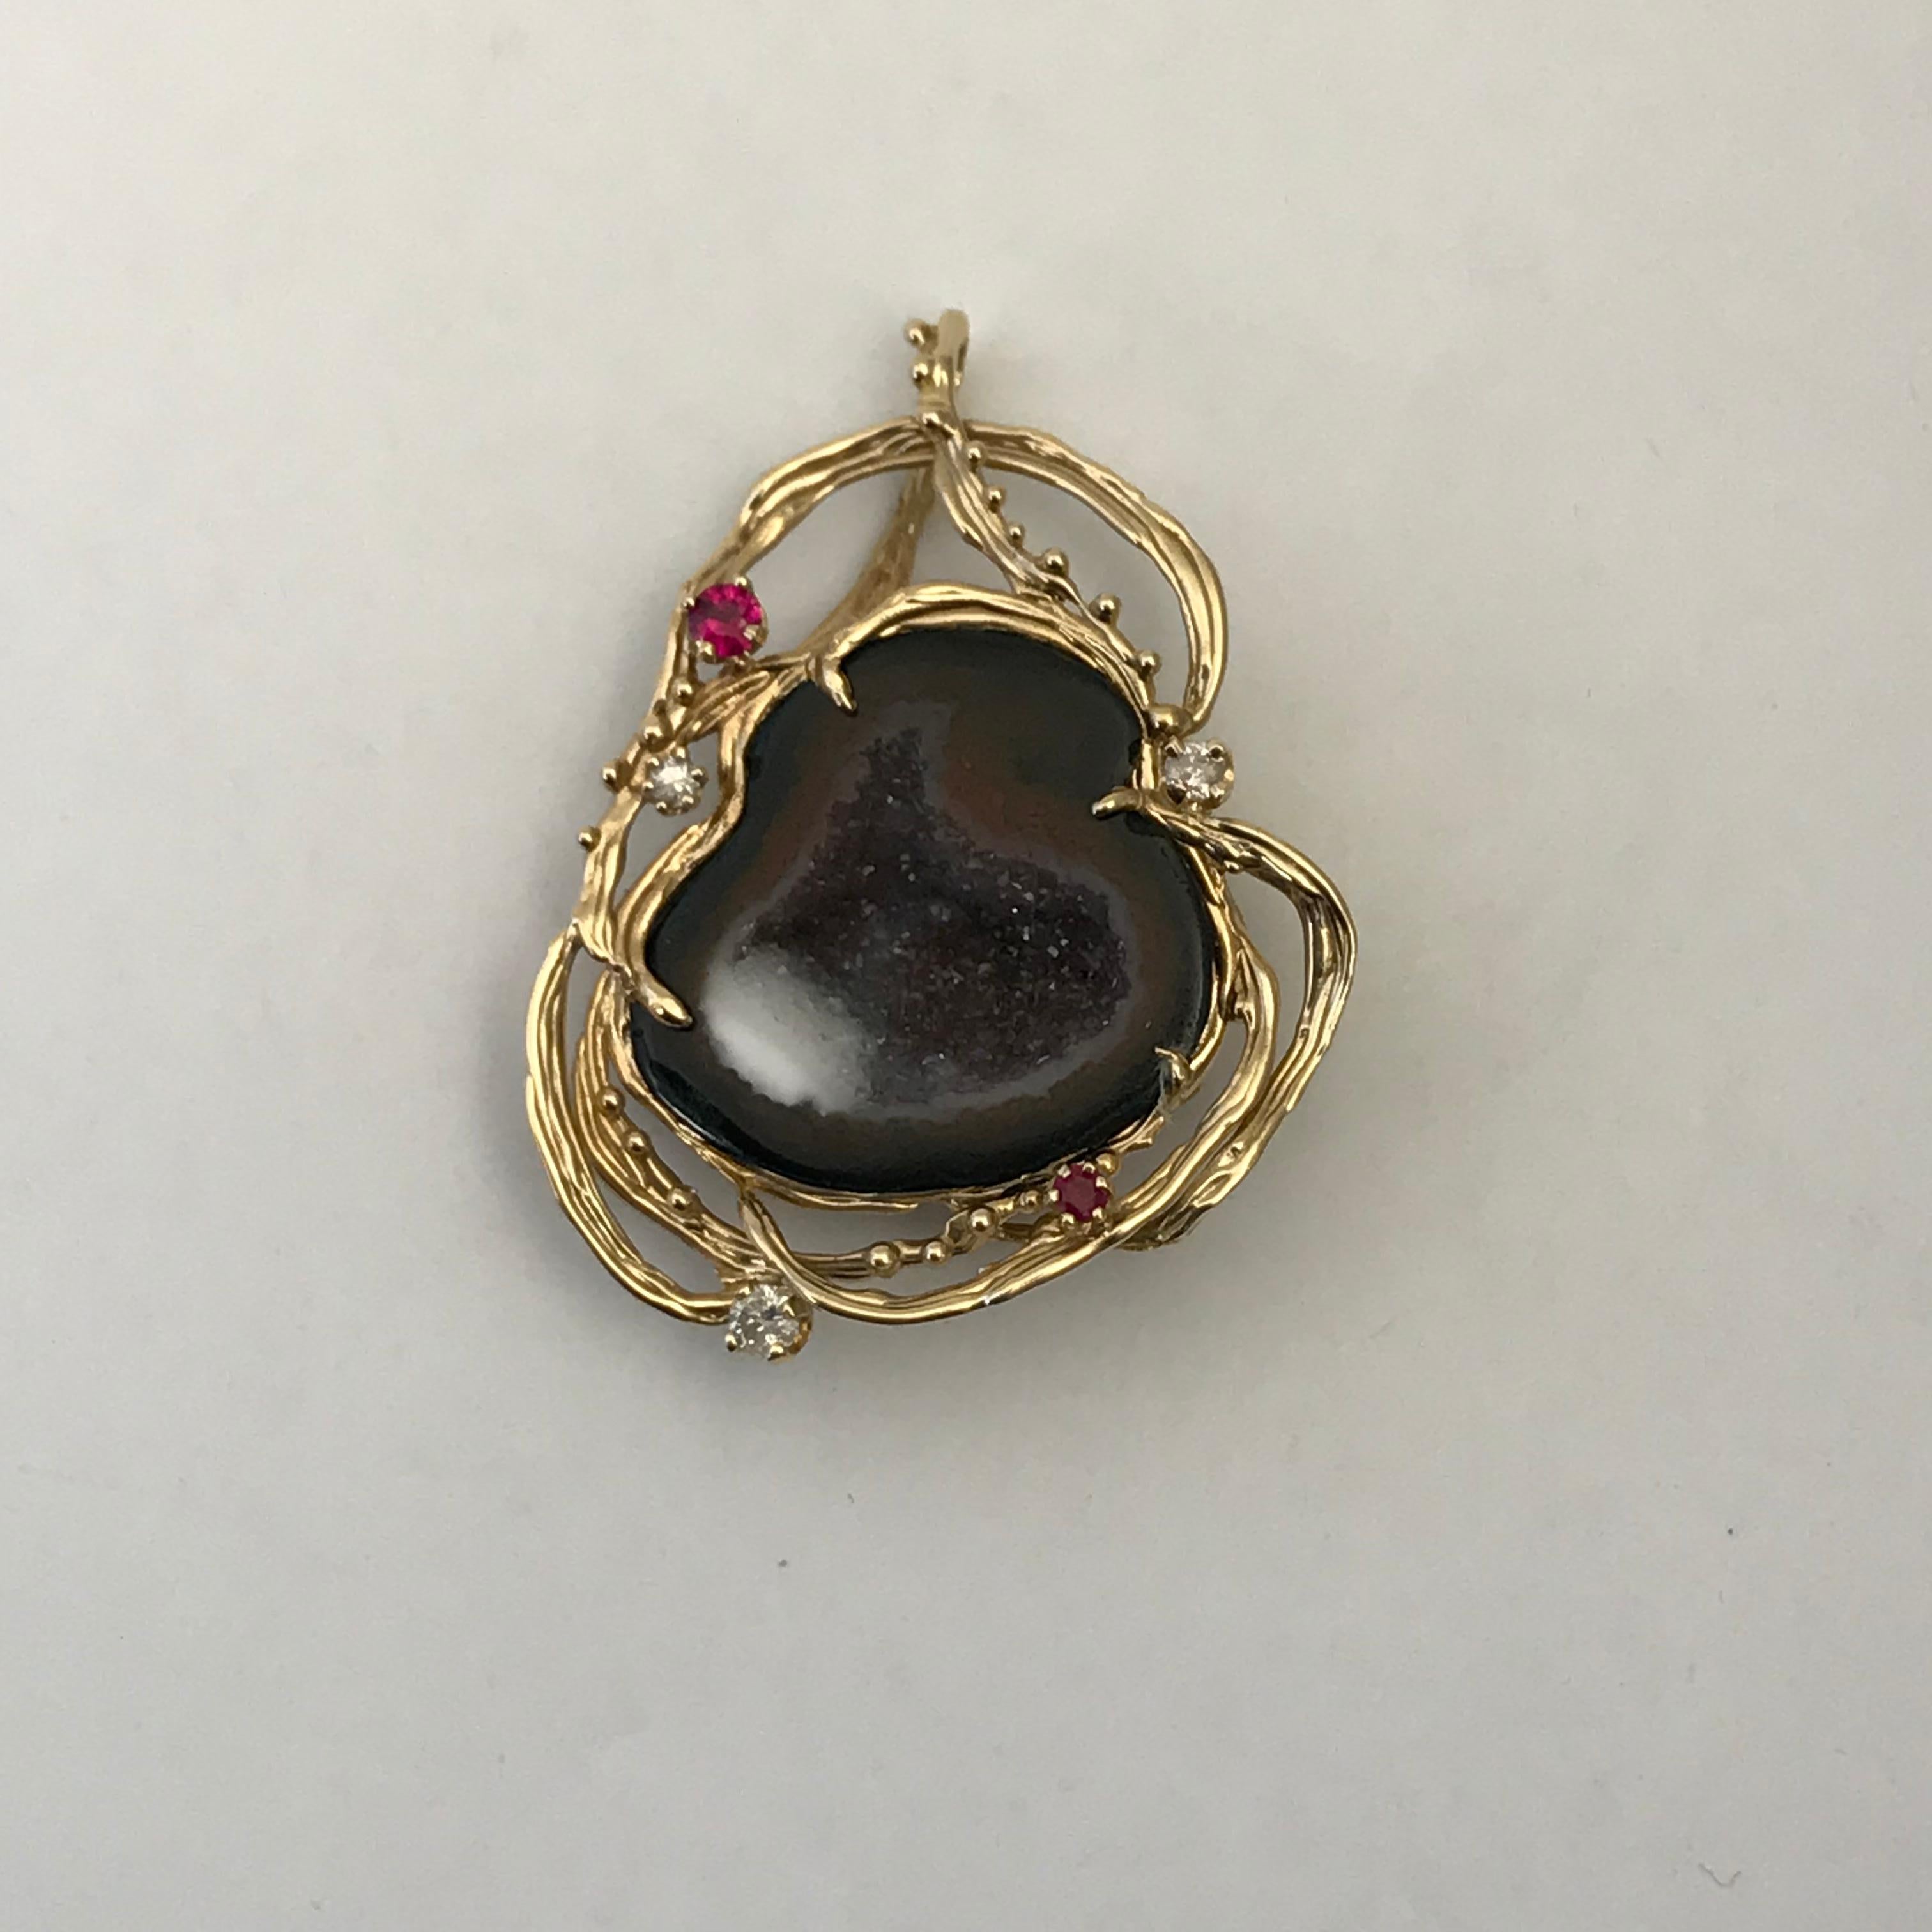  Micro Geode Pendant in 14 K Yellow Gold 

This Micro Geode pendant is set in 14k yellow Gold.  The gold is free-form around the geode with Sapphires & Diamonds surrounding the outside of micro geode. It is 100% natural in color nothing about it has